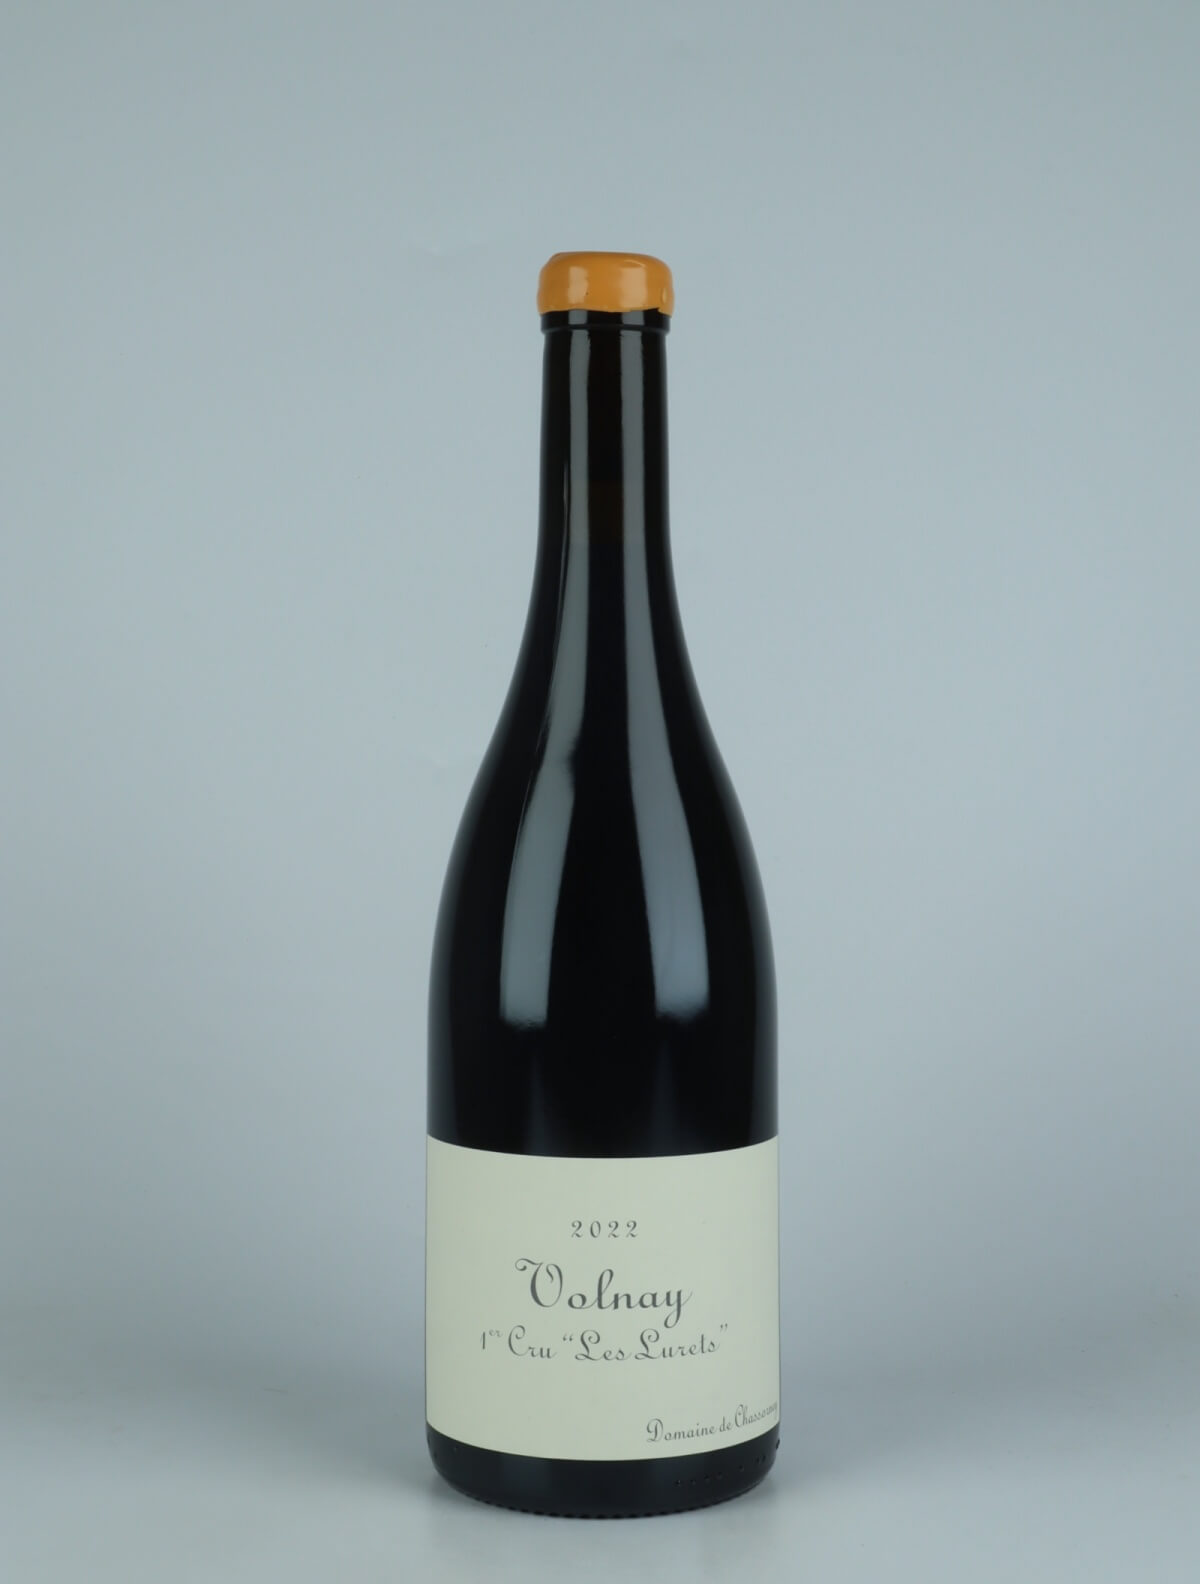 A bottle 2022 Volnay 1. Cru - Les Lurets Red wine from Domaine de Chassorney, Burgundy in France